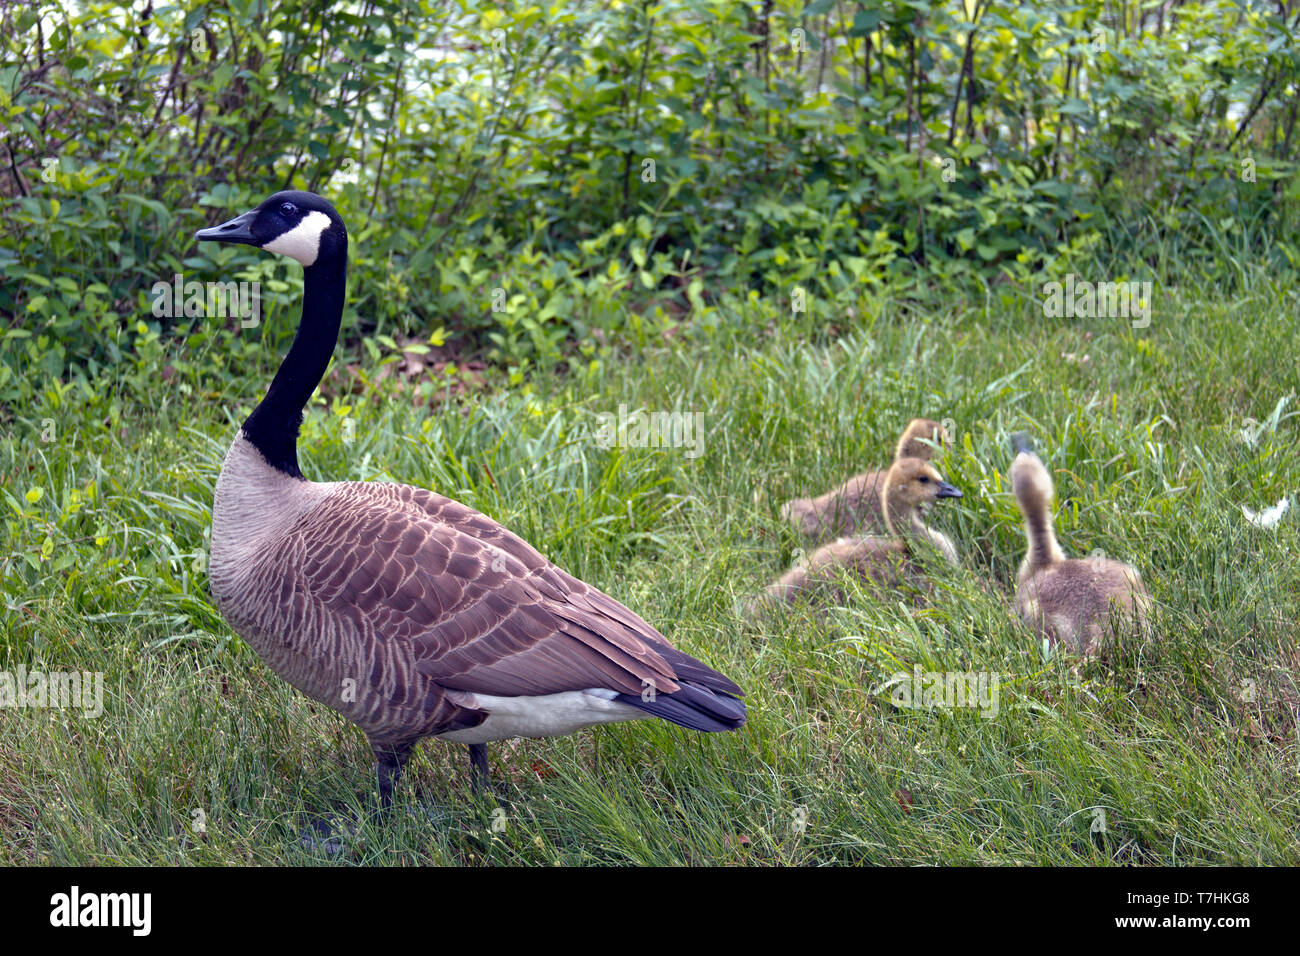 A wild mama goose watches over her three fuzzy baby goslings in tall grass on a cloudy spring day Stock Photo